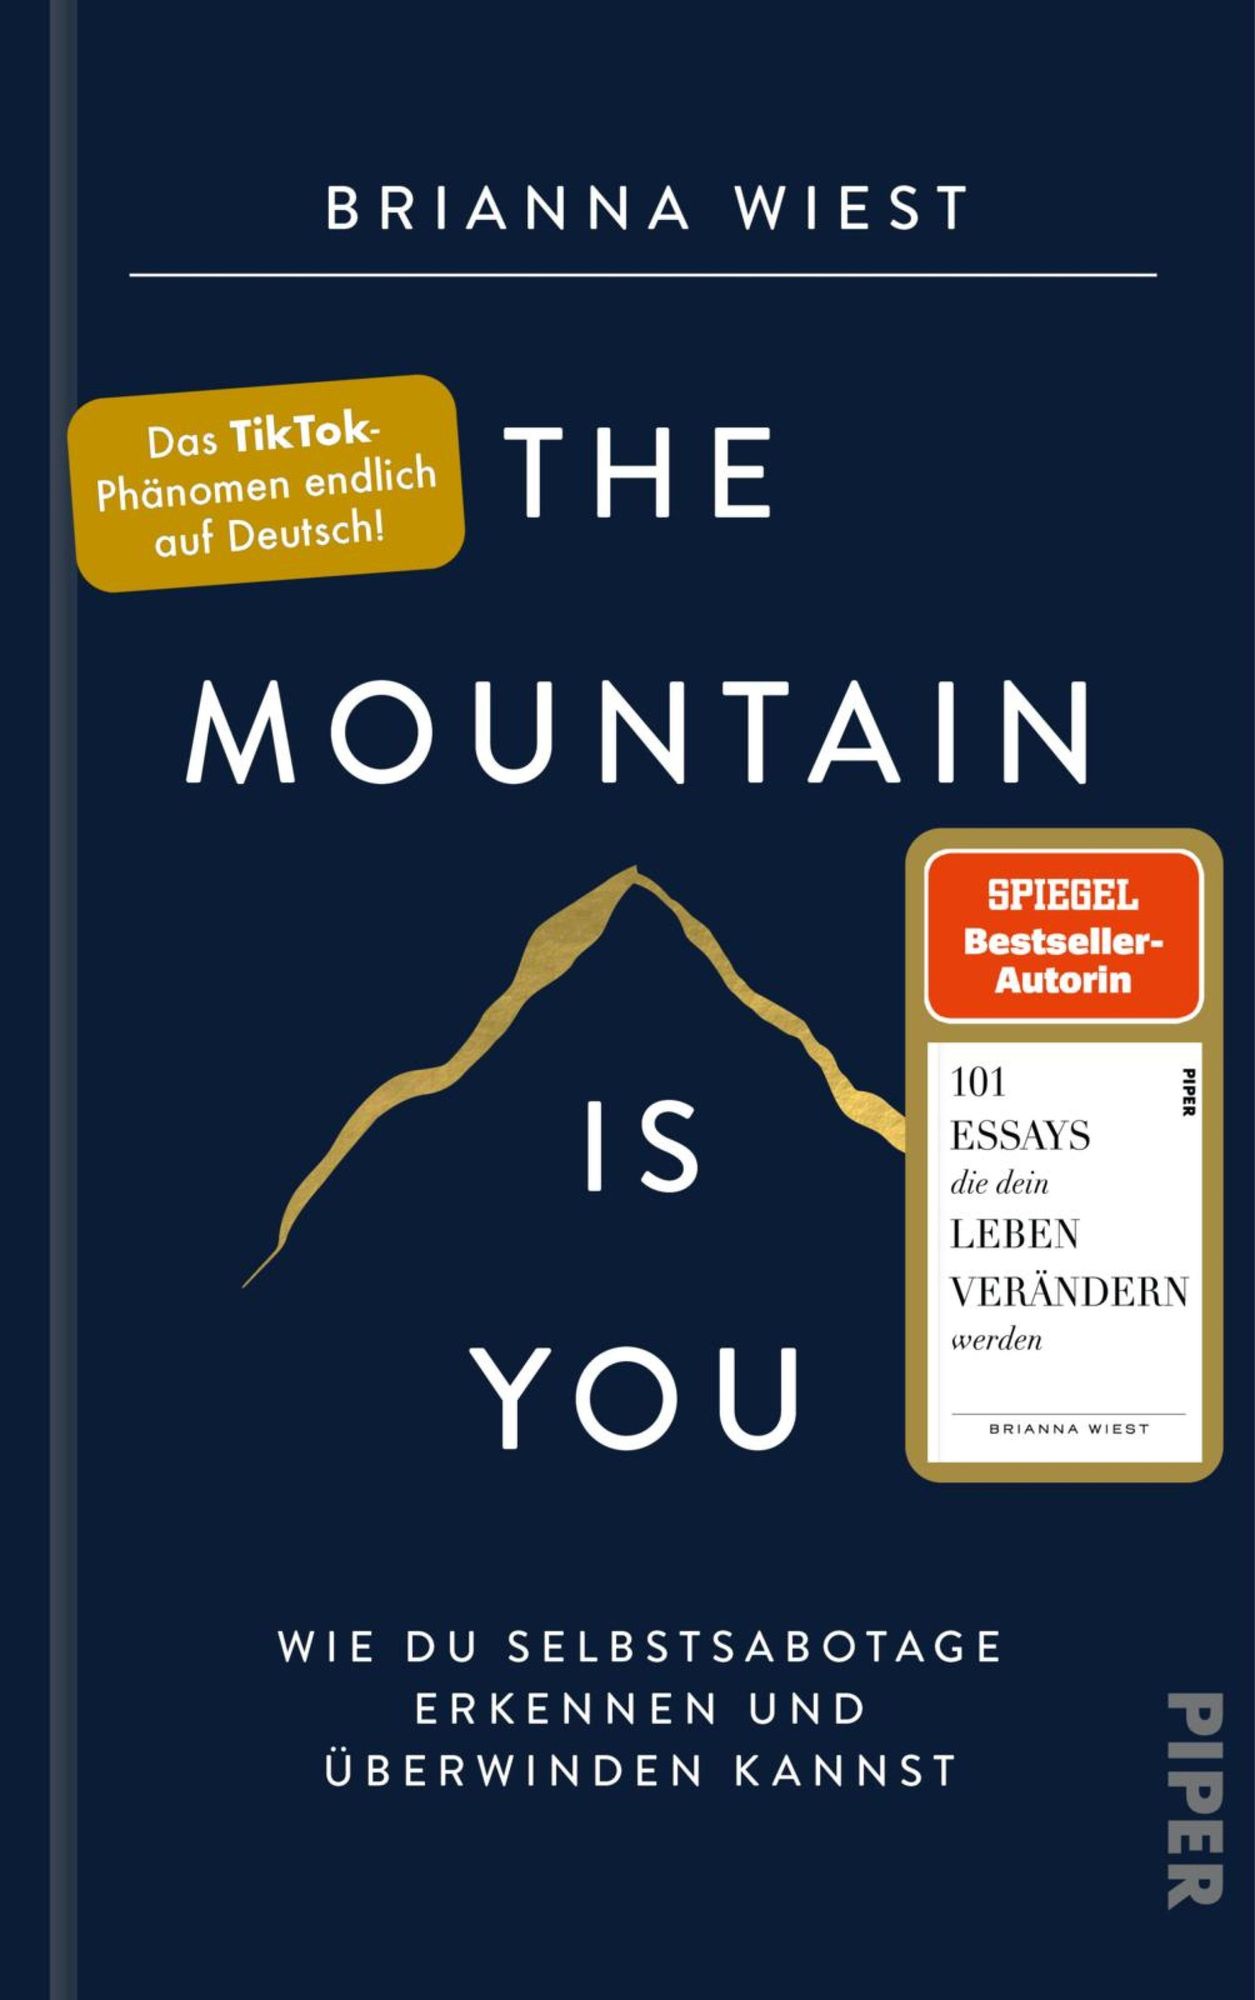 book review the mountain is you